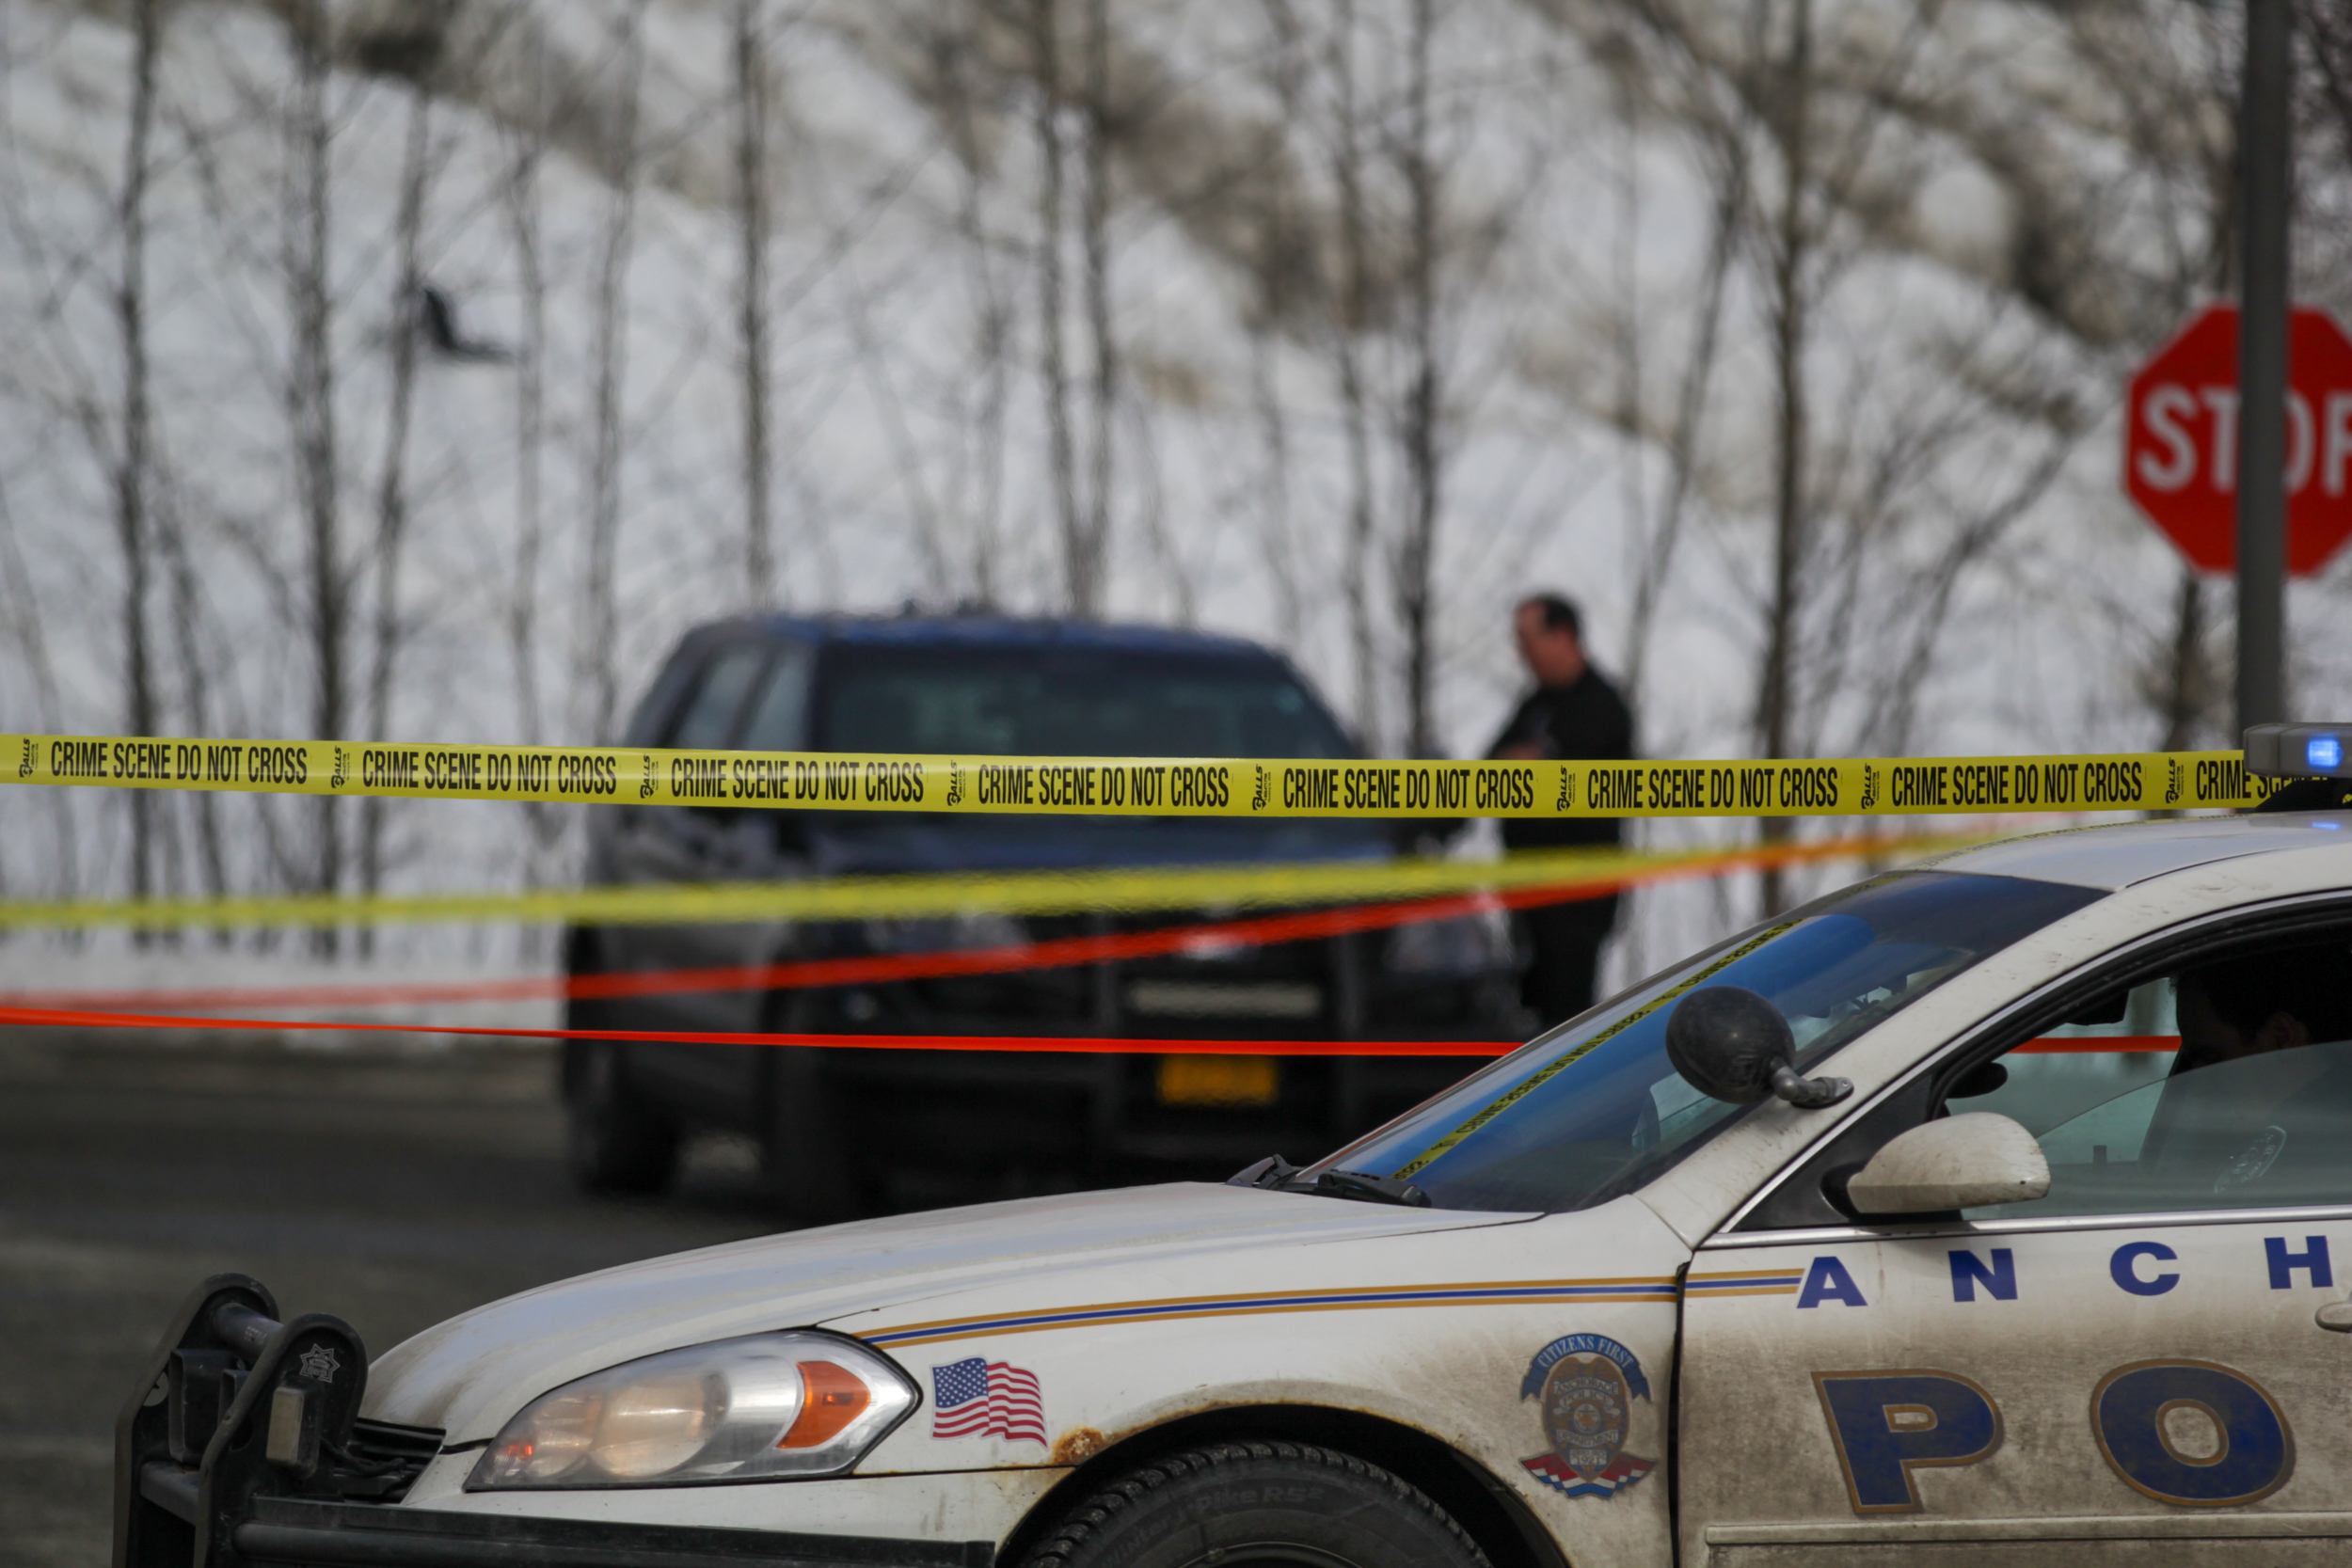 A cop car sits in front of crime scene tape in a parking lot.